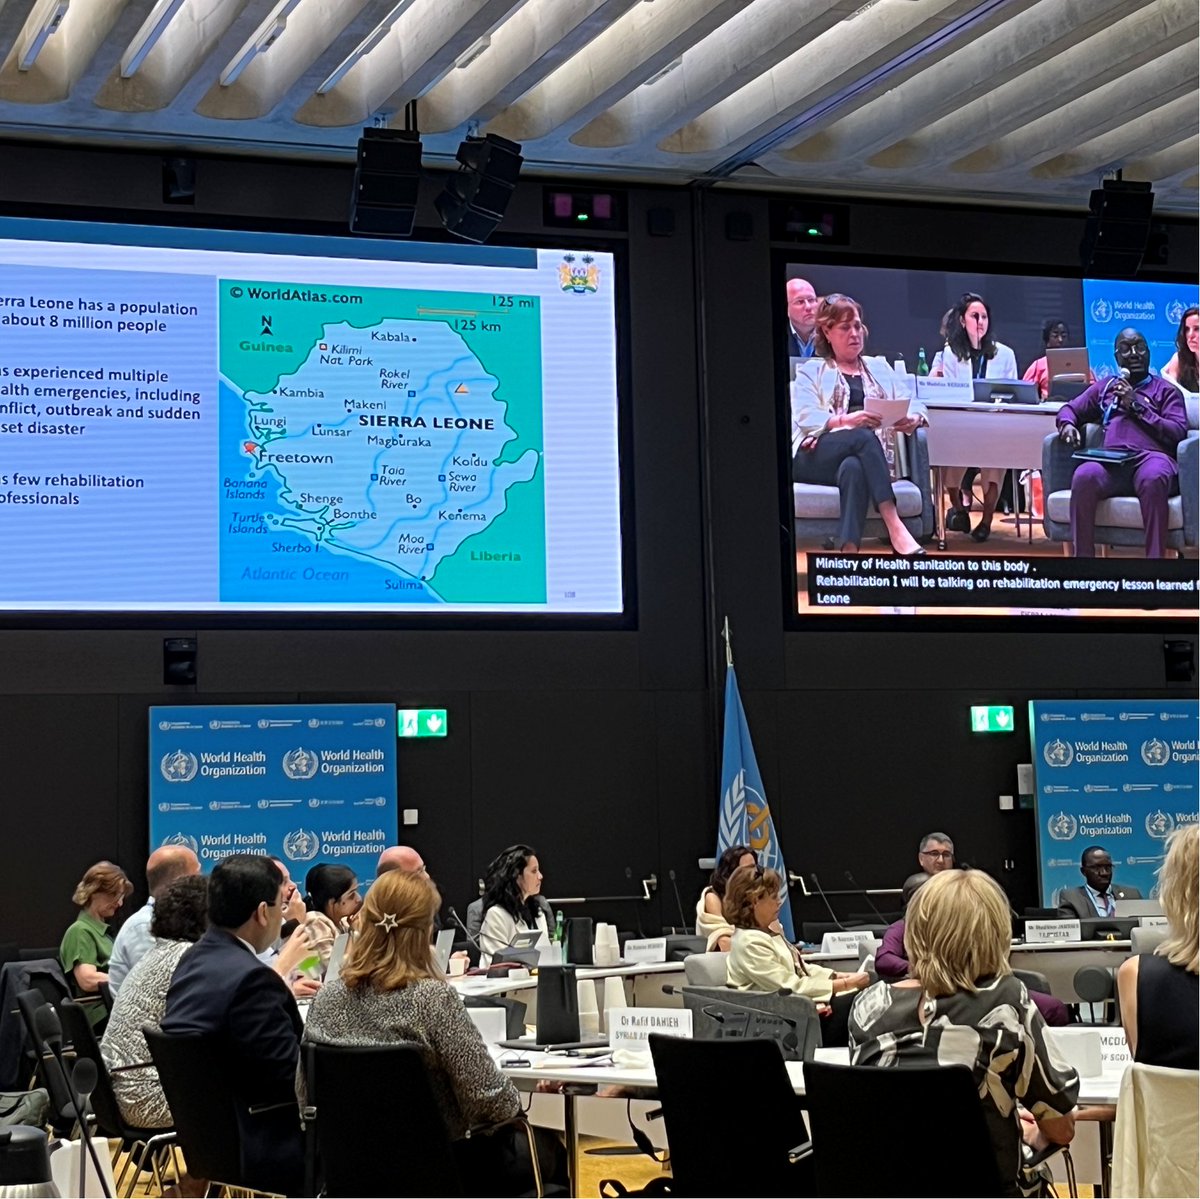 The Sierra Leone Physiotherapy Association is the newest member of @WorldPhysio1951 and one of the smallest with only 18 PTs. Today at @WHO during #Rehab2030 the SLPA president Ismaila Kebbie outlined the rehabilitation response in that country after a natural disaster. #GlobalPT